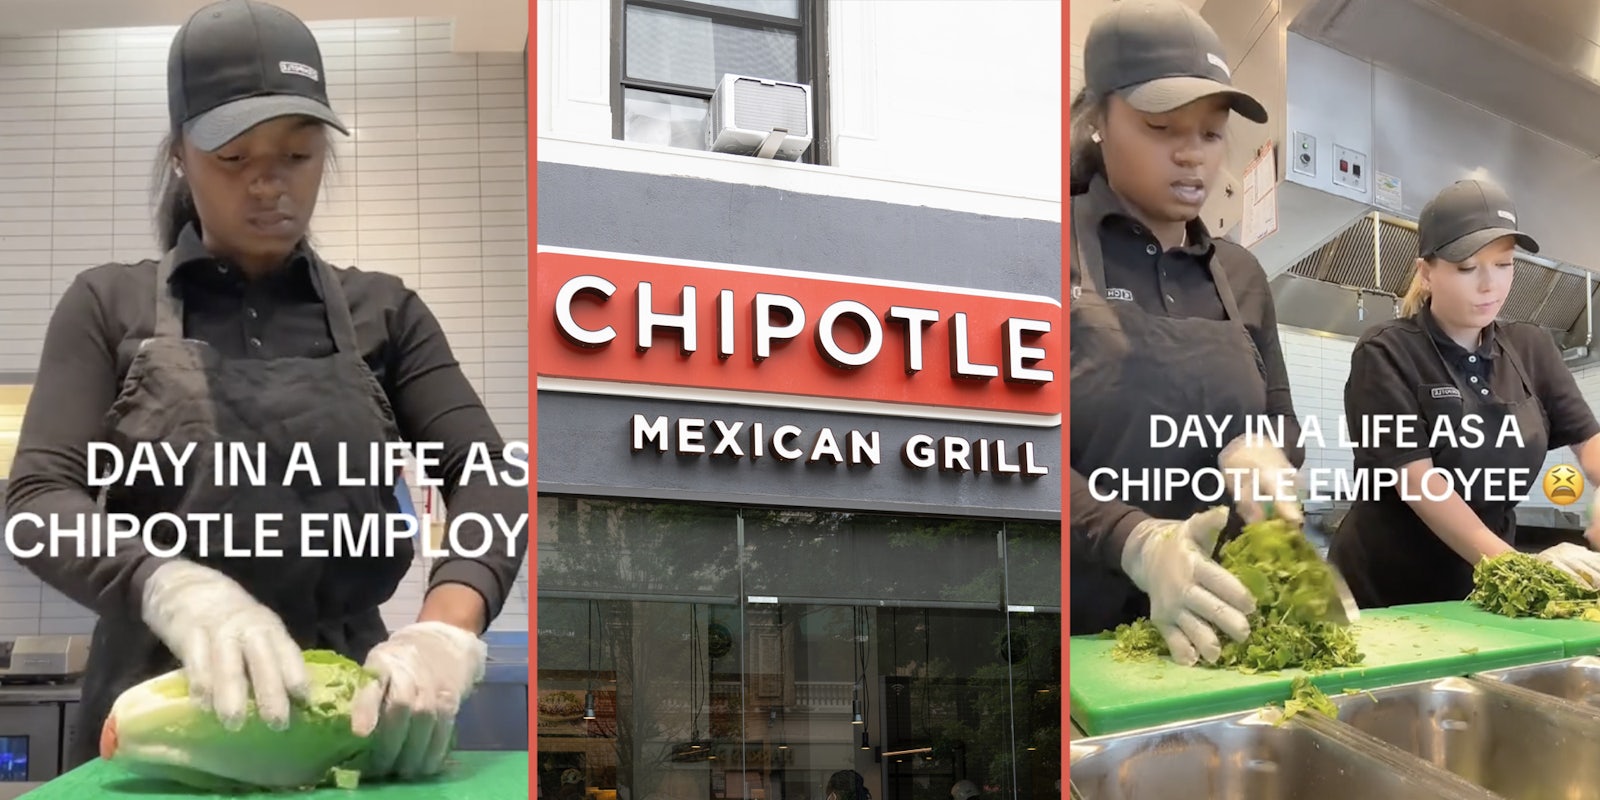 Woman chopping lettuce(l), Chipotle(c), Two chipotle workers chopping cilantro(r)